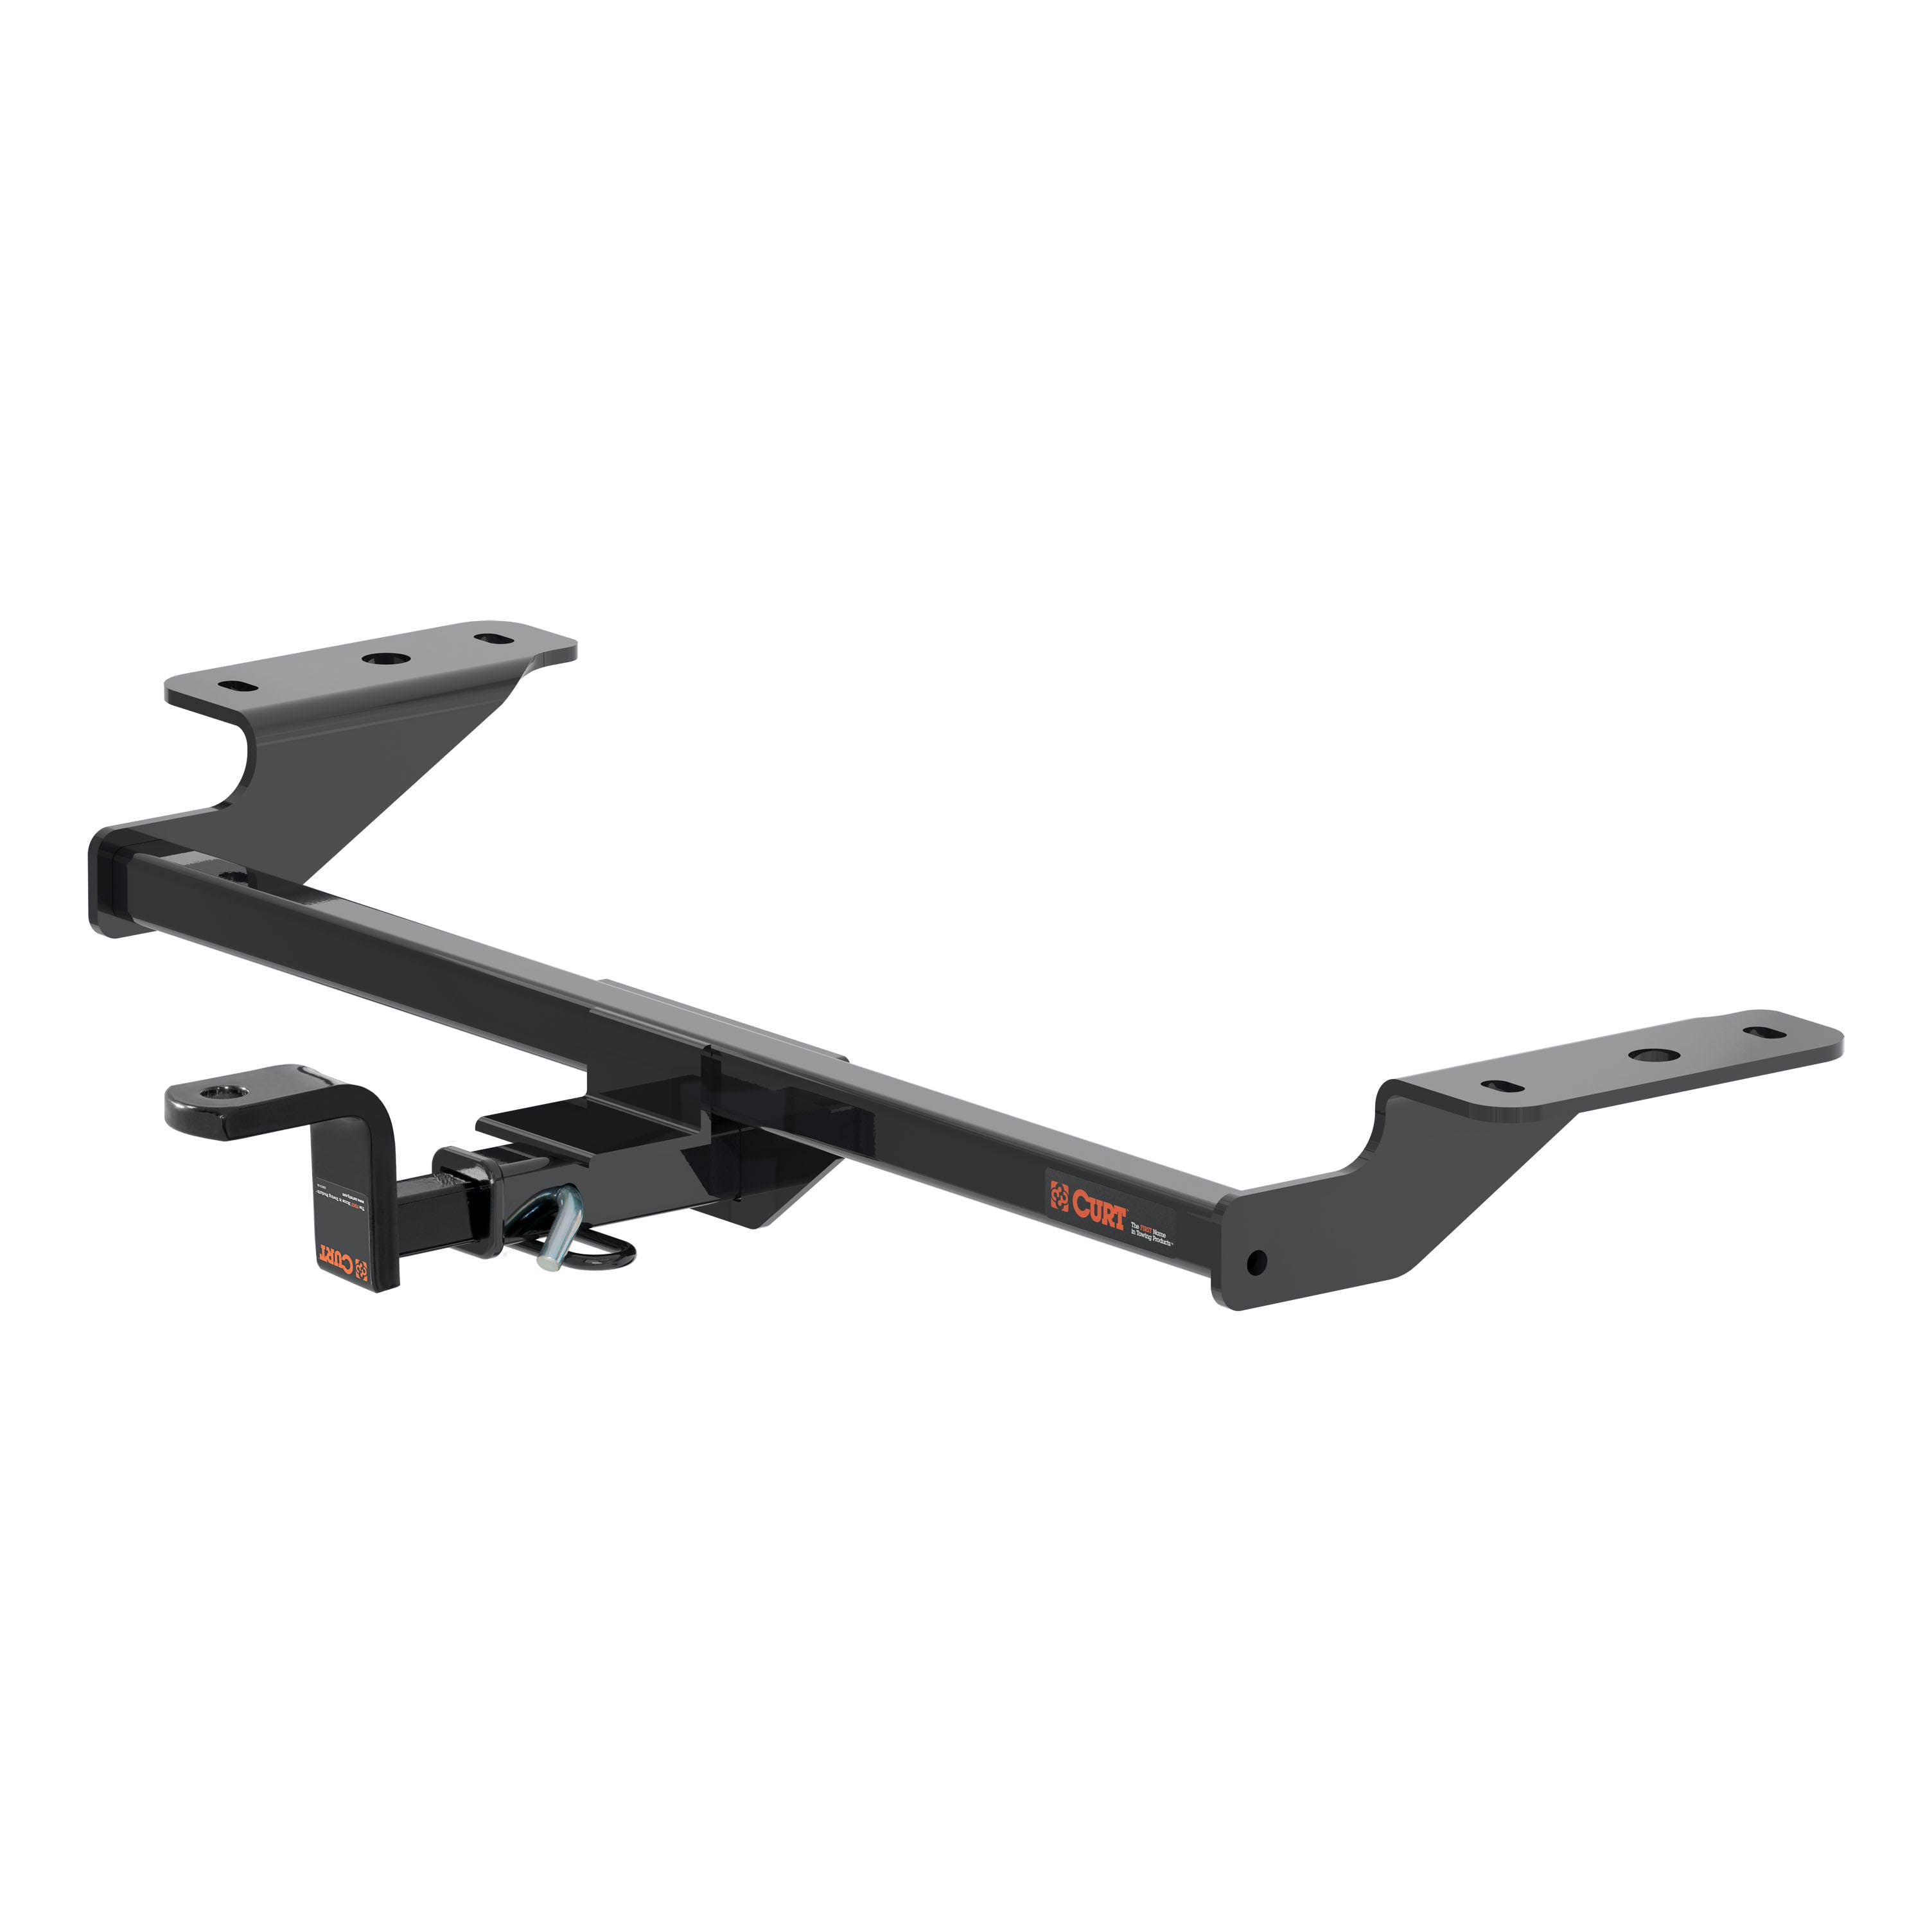 CURT 116203 Class 1 Trailer Hitch, 1-1/4 Ball Mount, Select Kia Forte (Drilling Required)